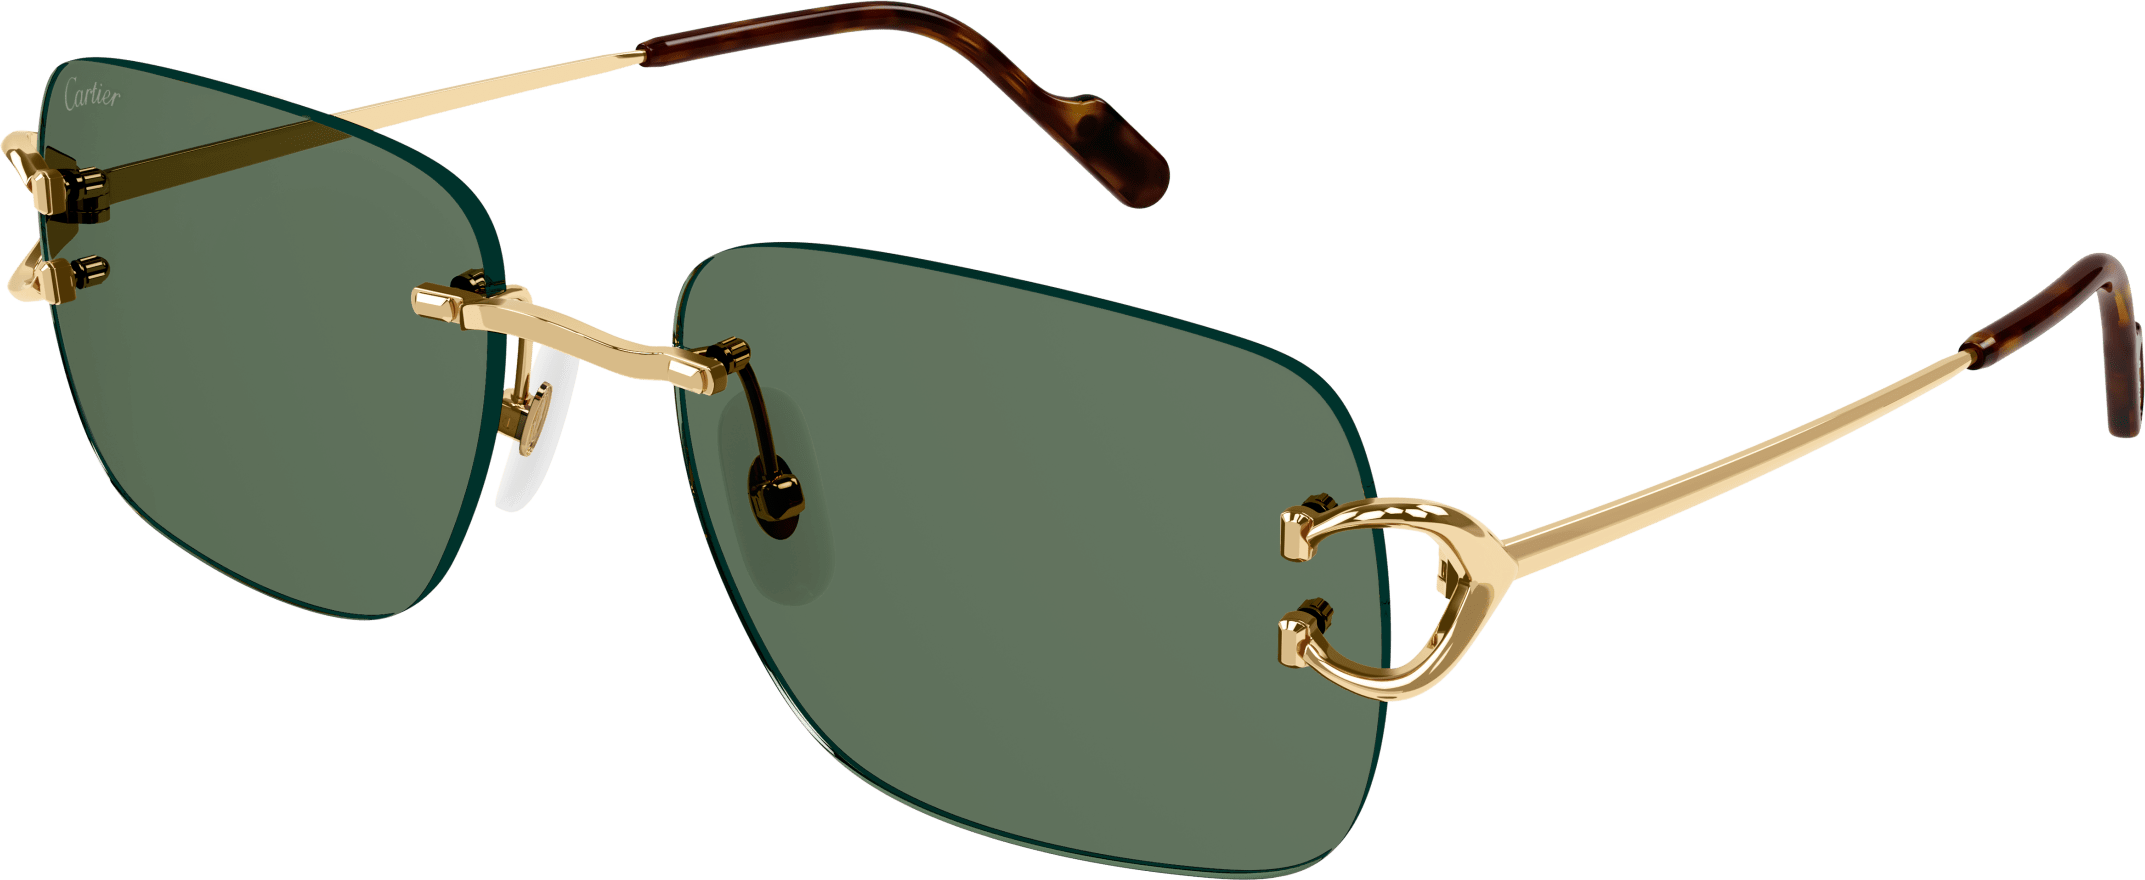 Color_CT0330S-005 - GOLD - GREEN - AR (ANTI REFLECTIVE)